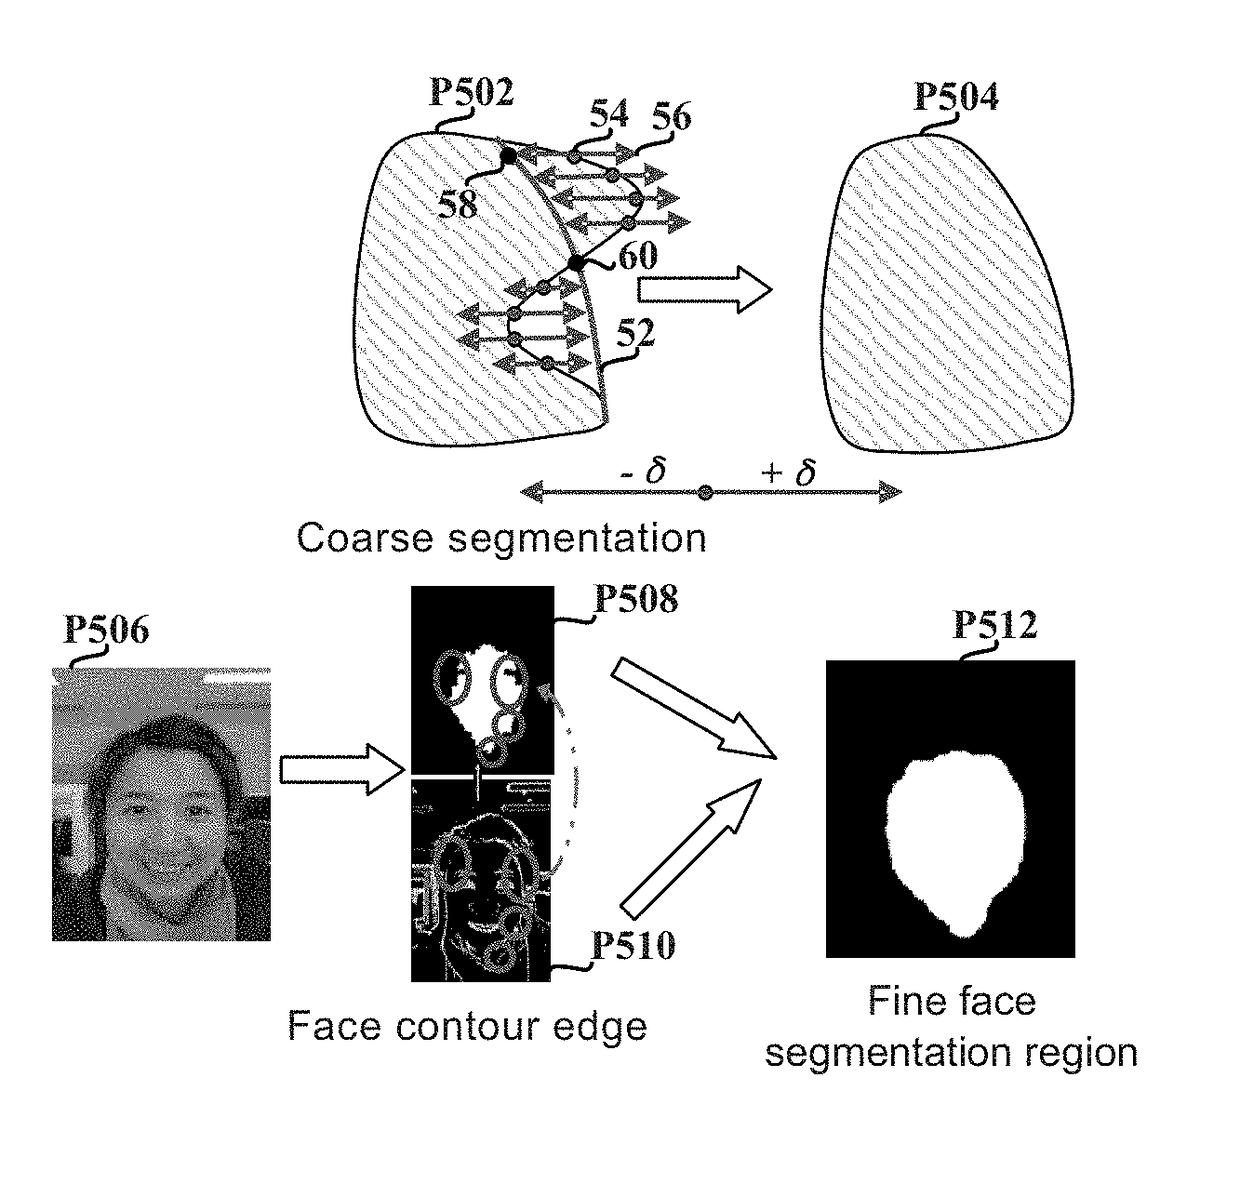 Method and apparatus for facial image processing